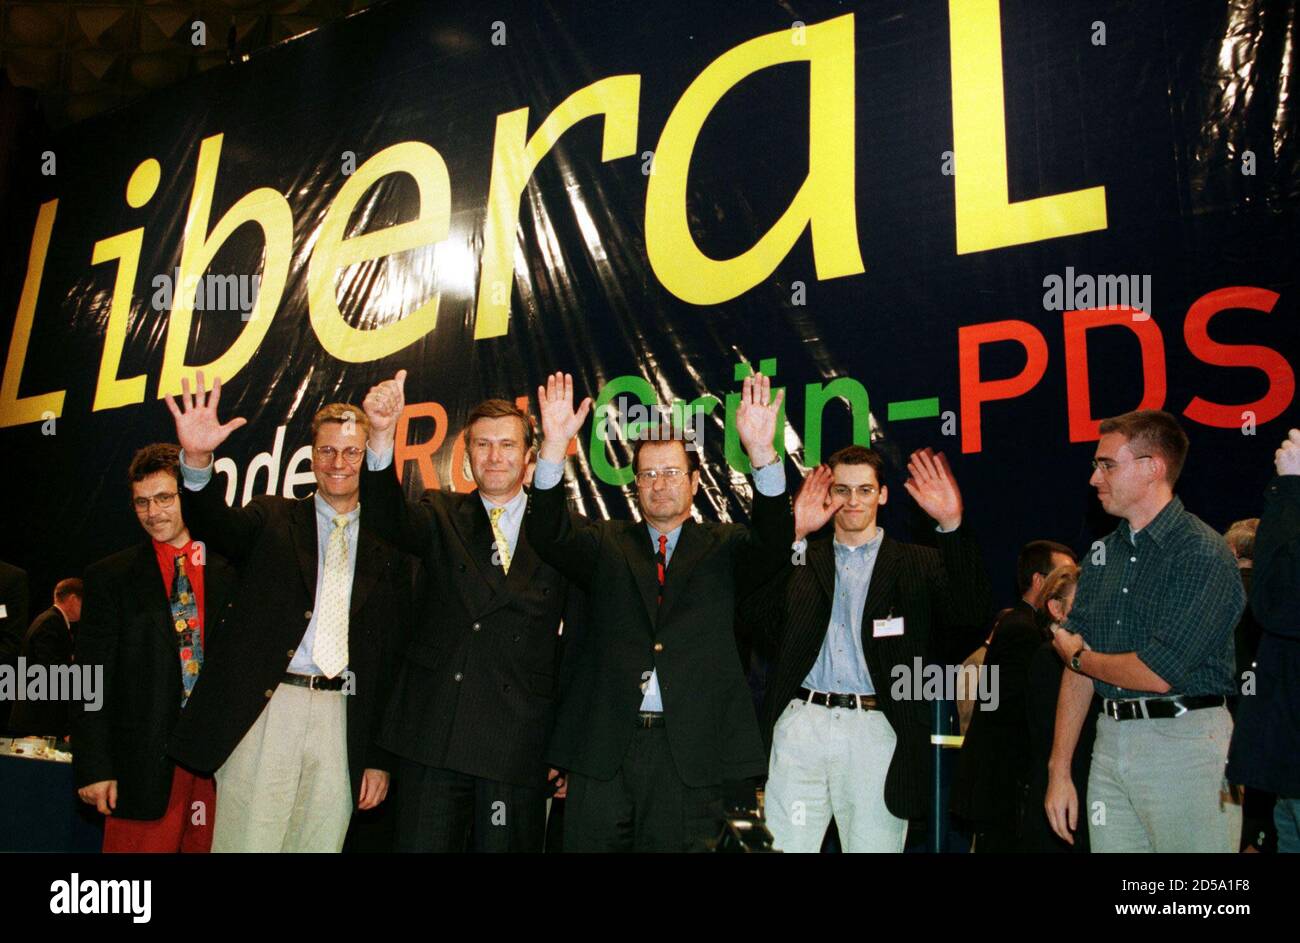 FDP party manager Guido Westerwelle, Free Democratic party (FDP) Wolfgang Gerhardt and German Foreign Minister Klaus Kinkel (LtR) wave to delegates accompanied by party members in front of an election poster reading " Liberal or Red-Green-PDS (Party of Democratic Socialism) "  at a one-day party congress in Bonn, August, 29. The FDP is launching a massive drive for "second votes" in the final stages of their election campaign to reach the five percent threshold in Germany's general elections on September 27. Stock Photo